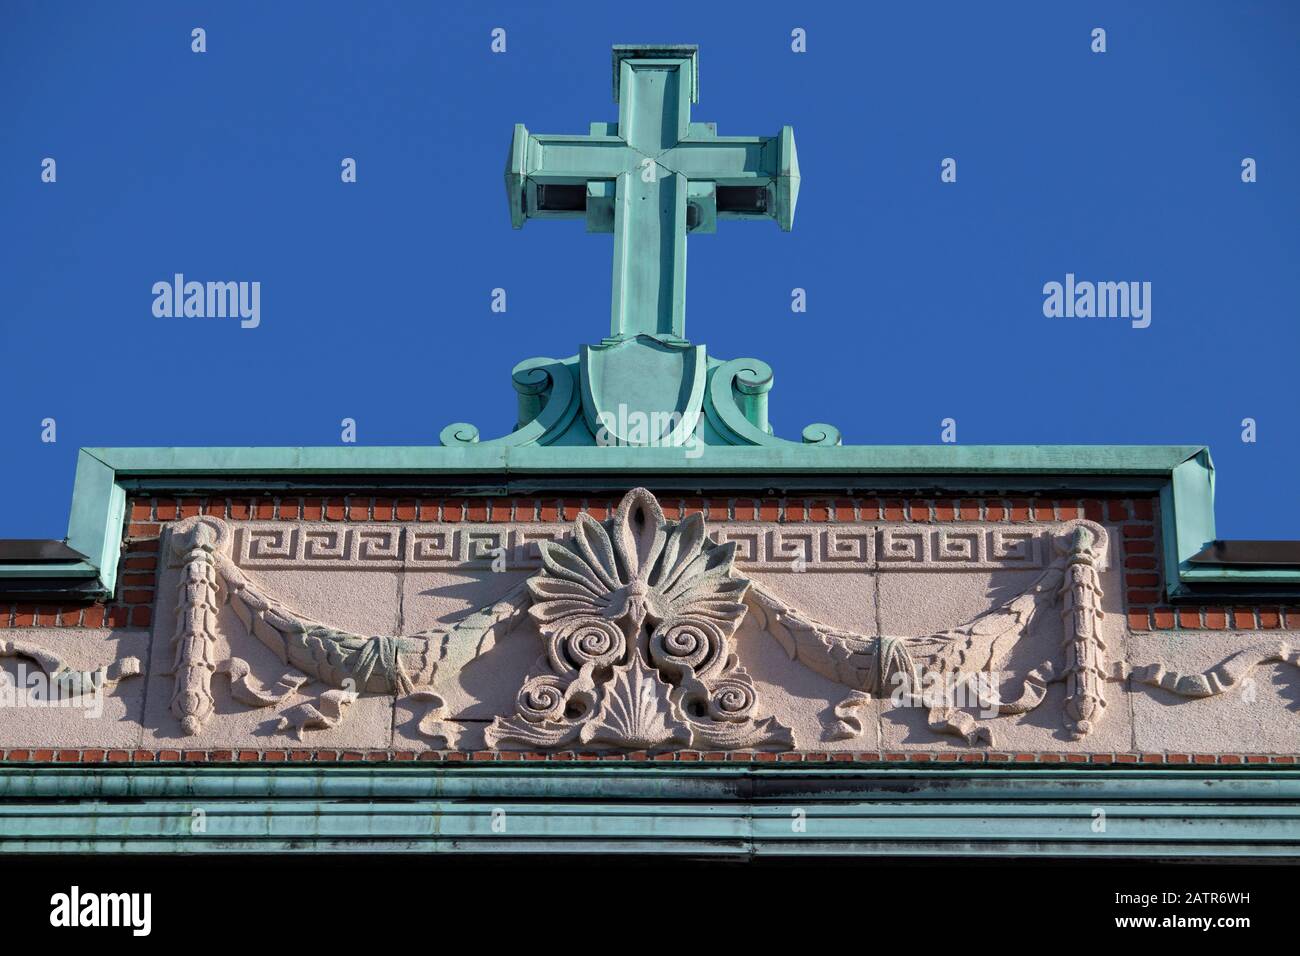 Roof top with oxidized green copper decorative cross and ornament, front view, facade building, Rosemont, Montreal, Quebec, Canada Stock Photo